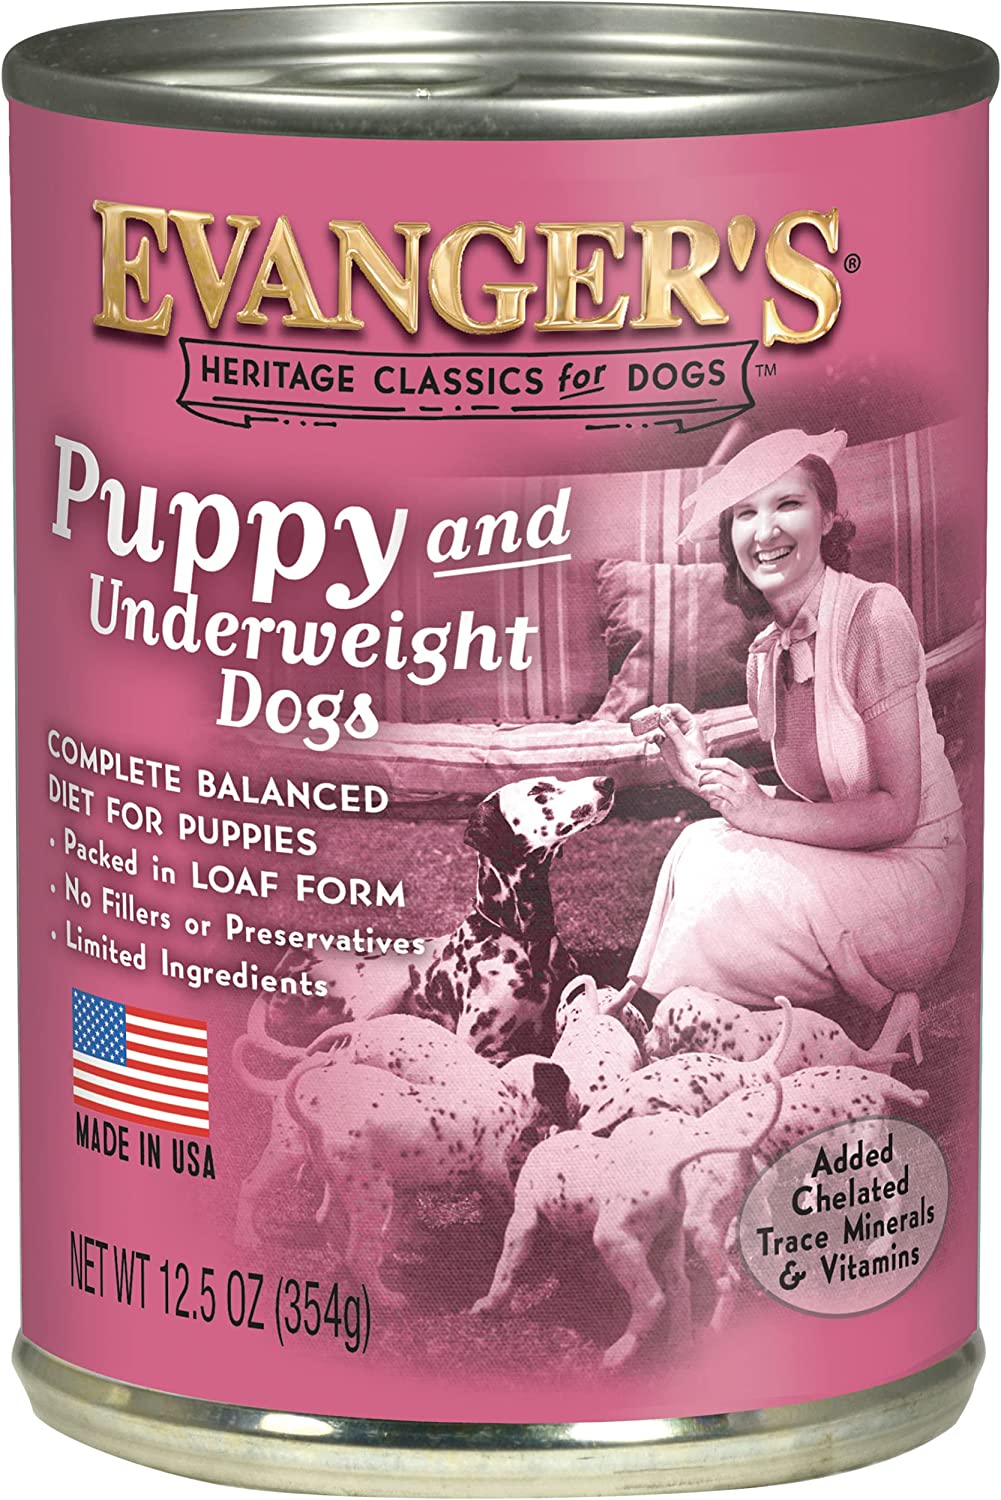 Evanger's Heritage Classics Puppy Dinner for Dogs - 12, 12.5 oz Cans